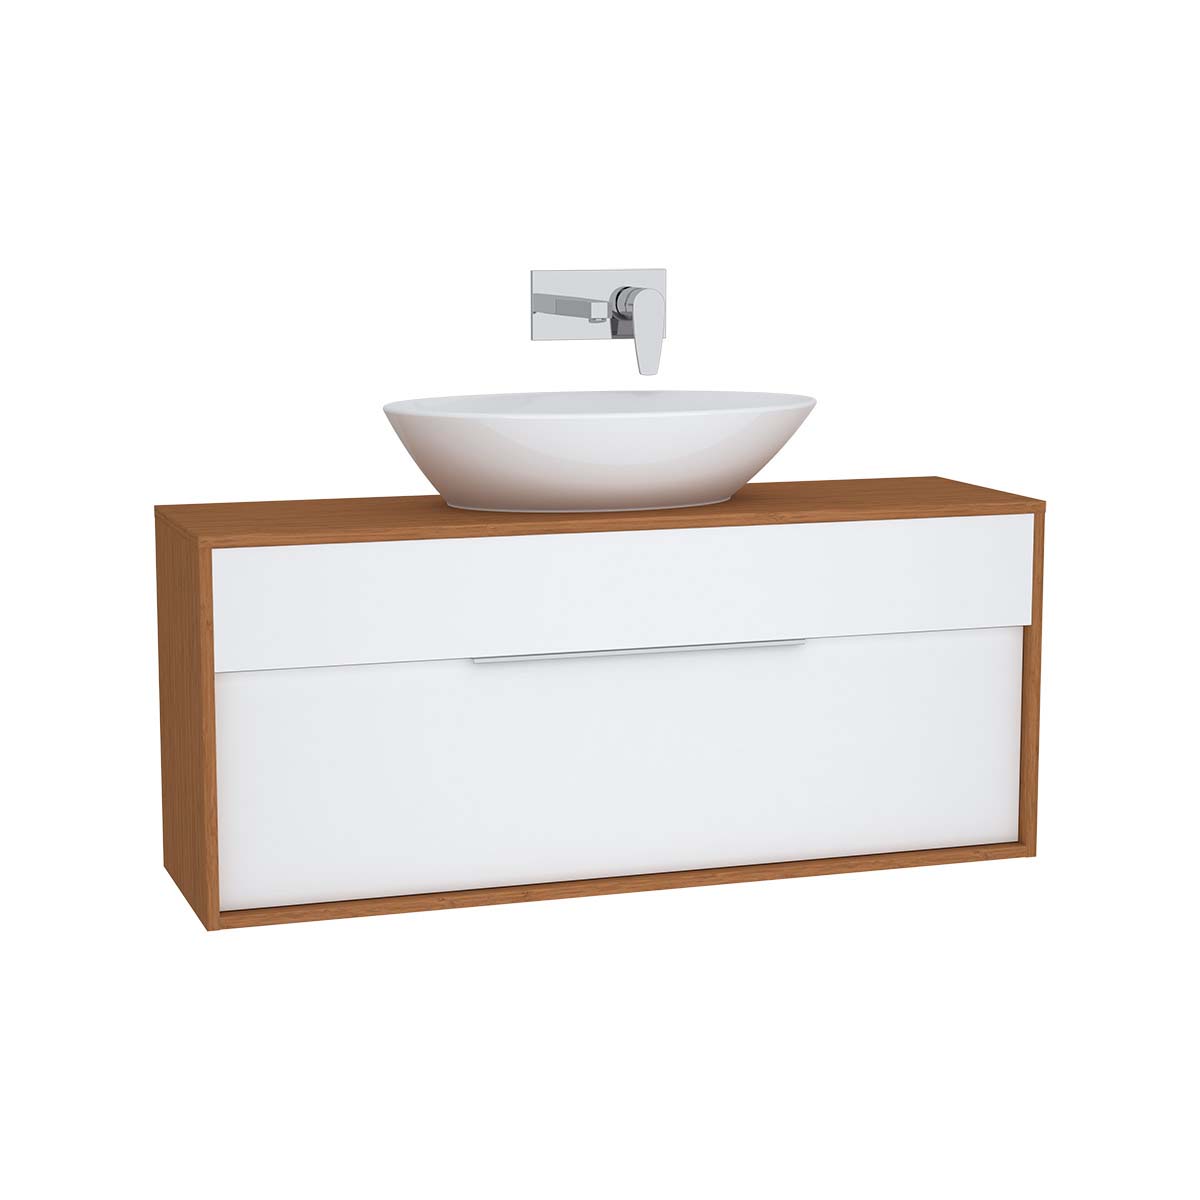 Integra Washbasin Unit 120 Cm With 1 Drawer For Countertop